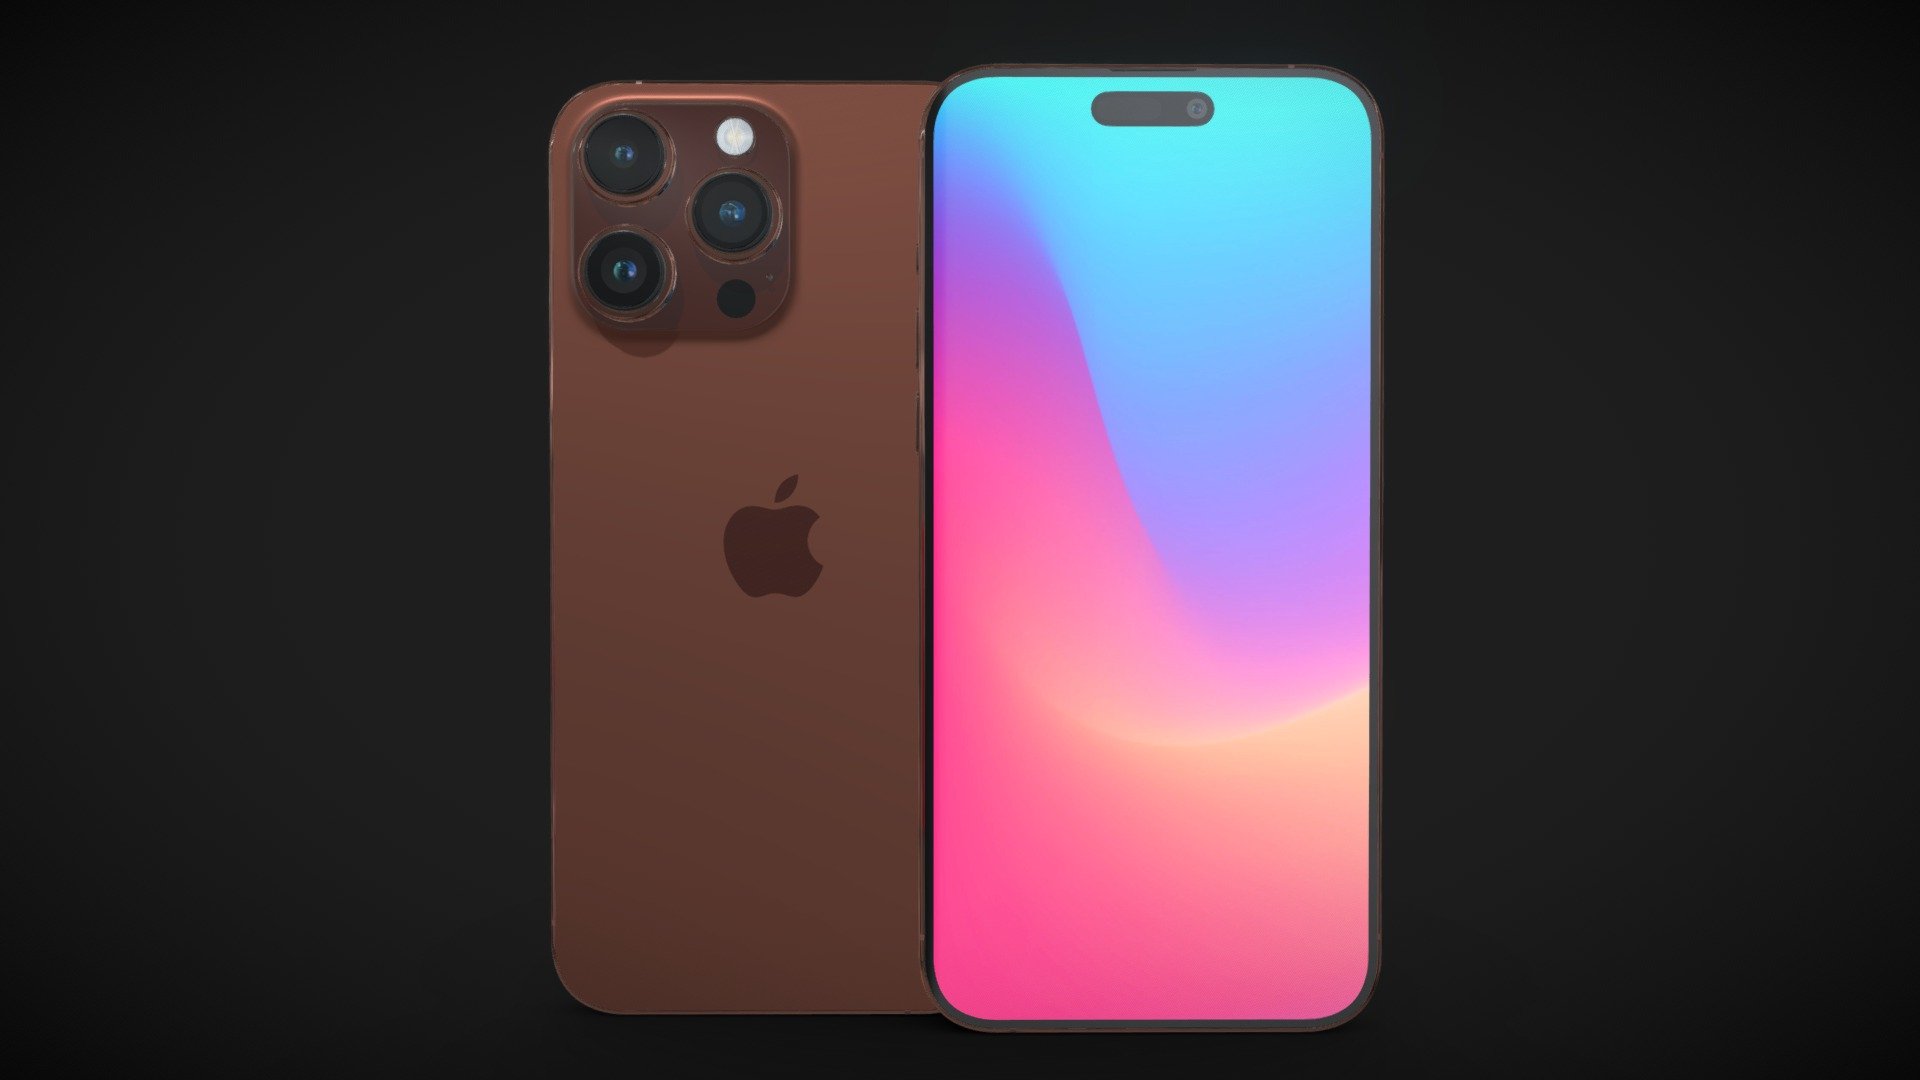 Realistic (copy) 3d model Apple iPhone 15 pro MAX v1.

This set:




1 file obj standard

1 file 3ds Max 2013 vray material

1 file 3ds Max 2013 corona material

1 file of 3Ds

1 file e3d full set of materials.

1 file cinema 4d standard.

1 file blender cycles.

Topology of geometry:




forms and proportions of The 3D model

the geometry of the model was created very neatly

there are no many-sided polygons

detailed enough for close-up renders

the model optimized for turbosmooth modifier

Not collapsed the turbosmooth modified

apply the Smooth modifier with a parameter to get the desired level of detail

Materials and Textures:




3ds max files included Vray-Shaders

3ds max files included Corona-Shaders

Blender files included cycles shaders

Cinema 4d files included Standard-Shaders

Element 3d files

all texture paths are cleared

Organization of scene:




to all objects and materials

real world size (system units - mm)

coordinates of location of the model in space (x0, y0, z0)
 - Apple iPhone 15 pro MAX v1 - Buy Royalty Free 3D model by madMIX 3d model